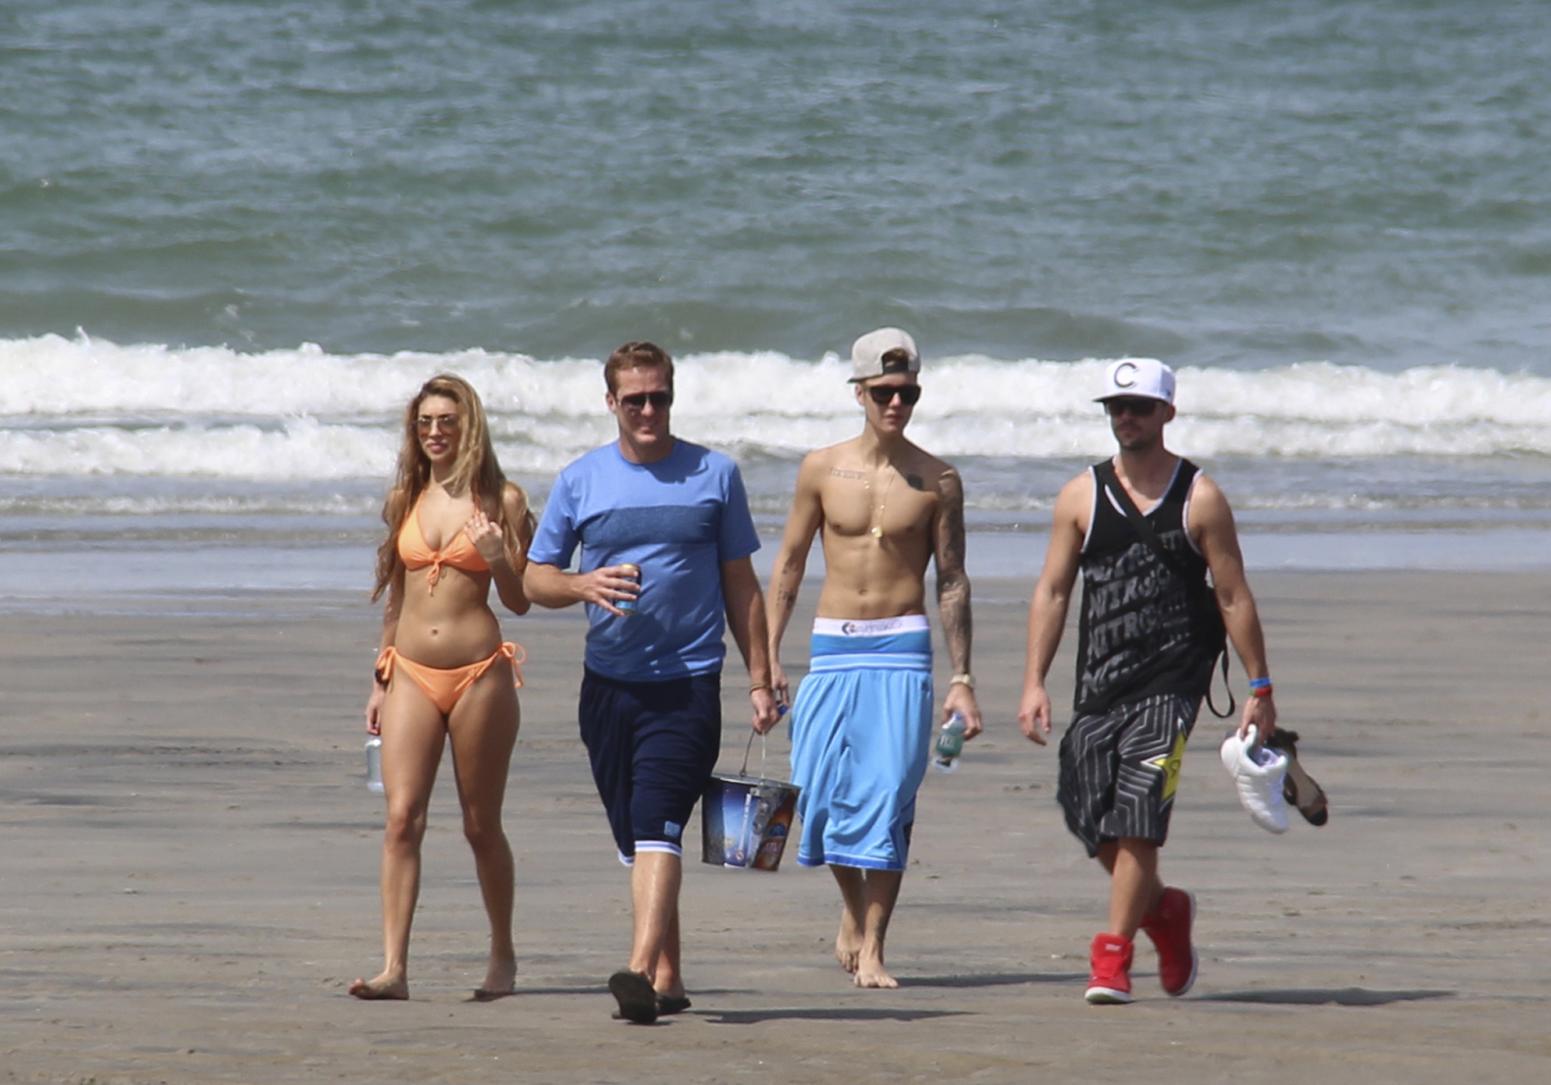 Justin Bieber, second right, and Chantel Jeffries, far left, walk with unidentified people on a beach in Punta Chame, Panama, Saturday, Jan. 25, 2014. A Panamanian radio and television host says trouble-plagued pop star Justin Bieber has been relaxing on a beach in Panama on a vacation from the United States. Eddy Vasquez was filming a show at the Pacific Coast resort in Punta Chame, about 90 miles west of Panama City, when he spotted Bieber and members of his entourage walking along the beach. (AP Photo/Eddy Vasquez)